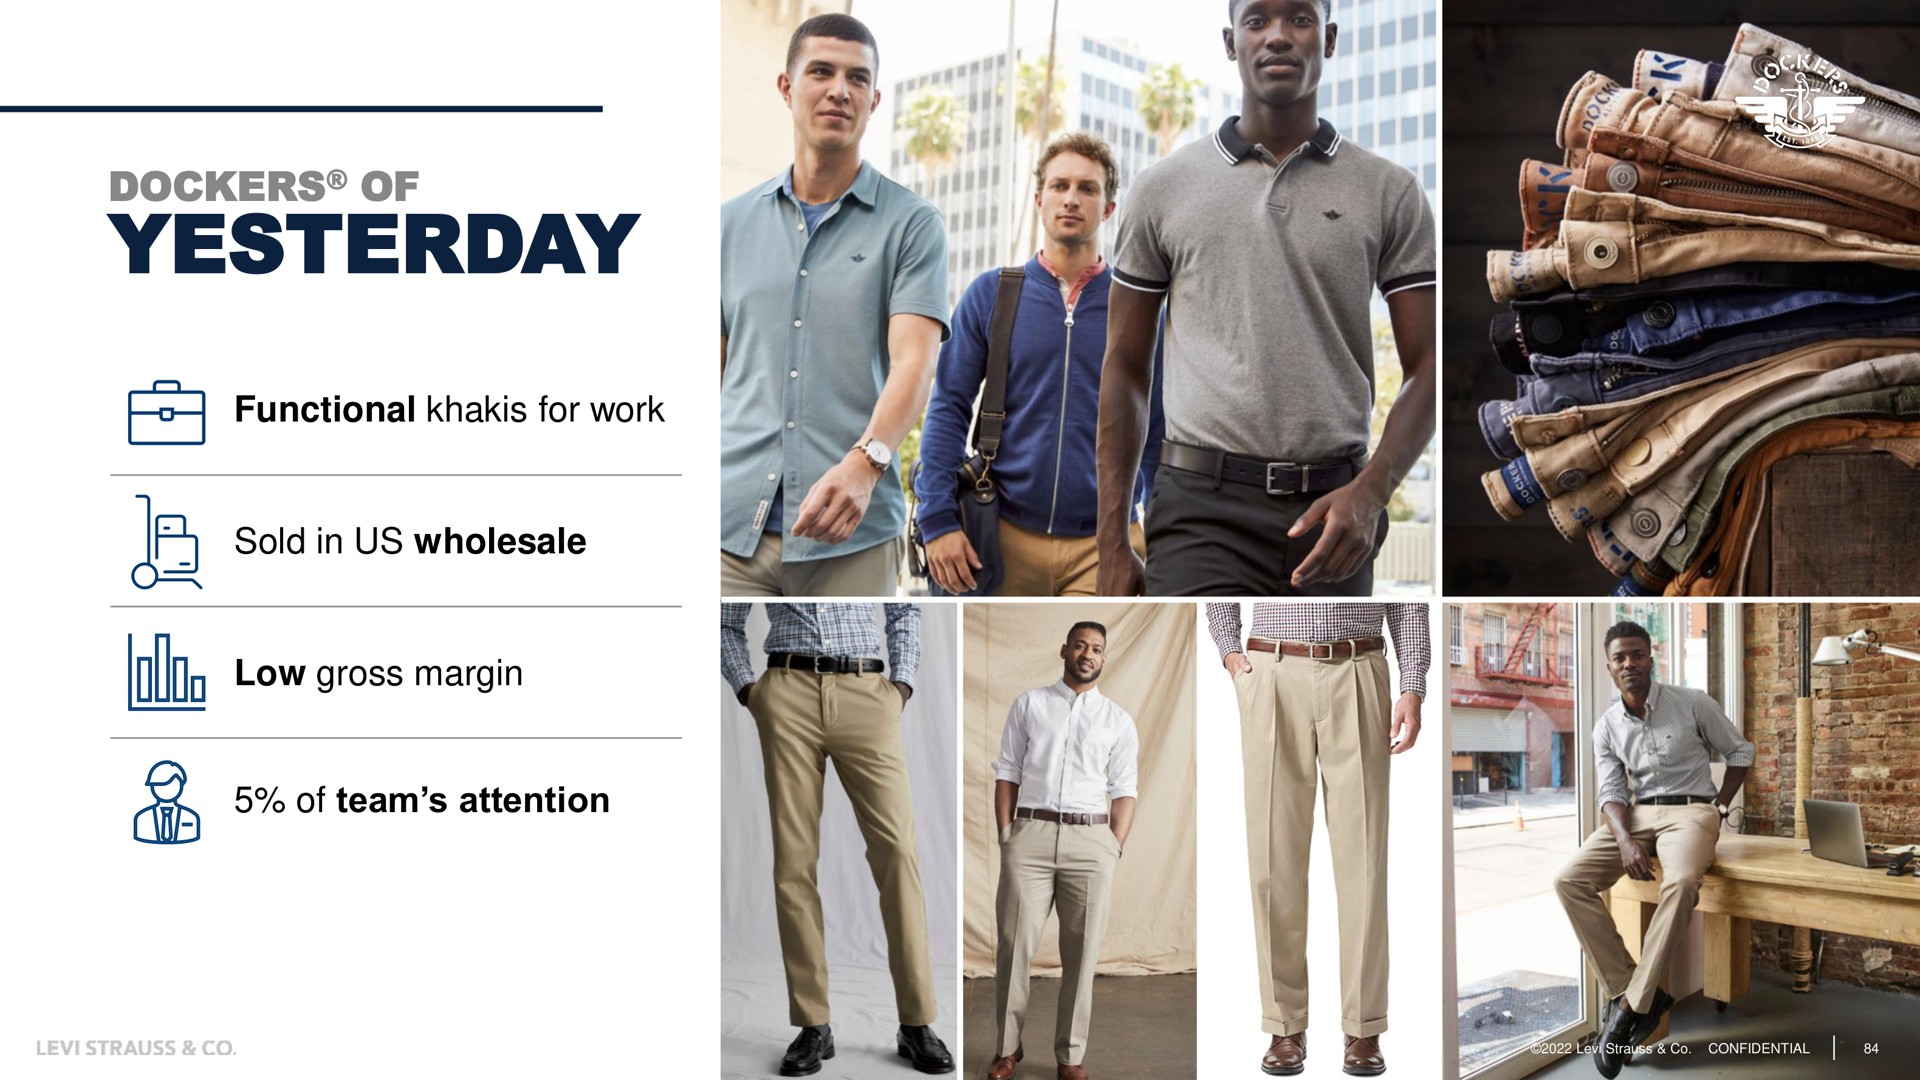 dockers of yesterday functional khakis for work a sold in us wholesale low gross margin team attention | Levi Strauss